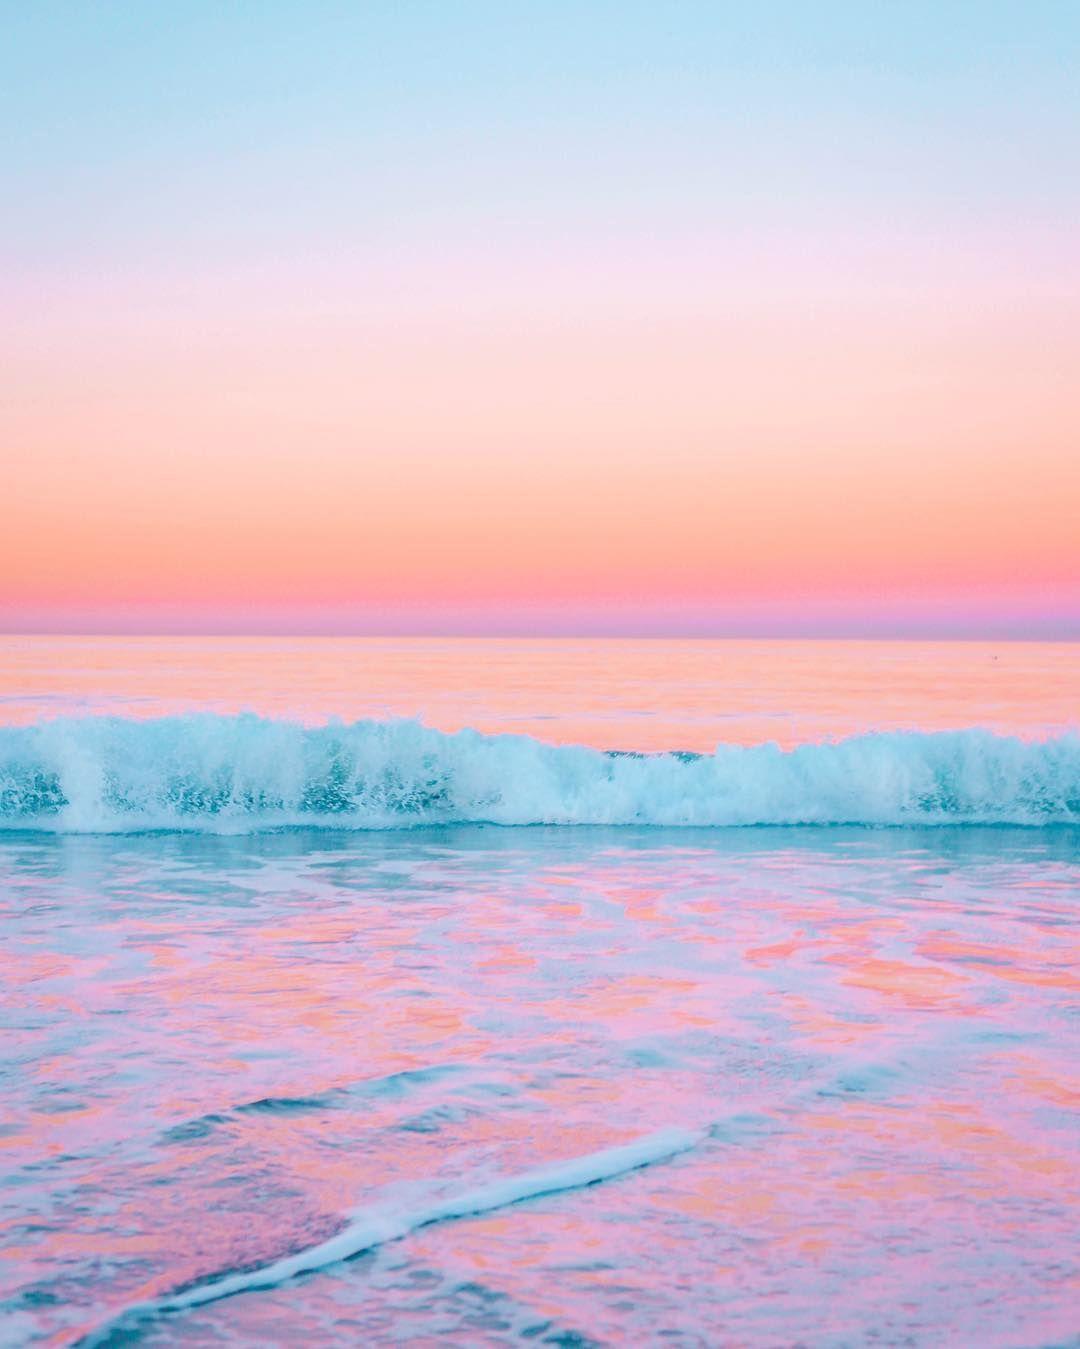 IPhone wallpaper of a sunset over the ocean with pink and blue colors. - Ocean